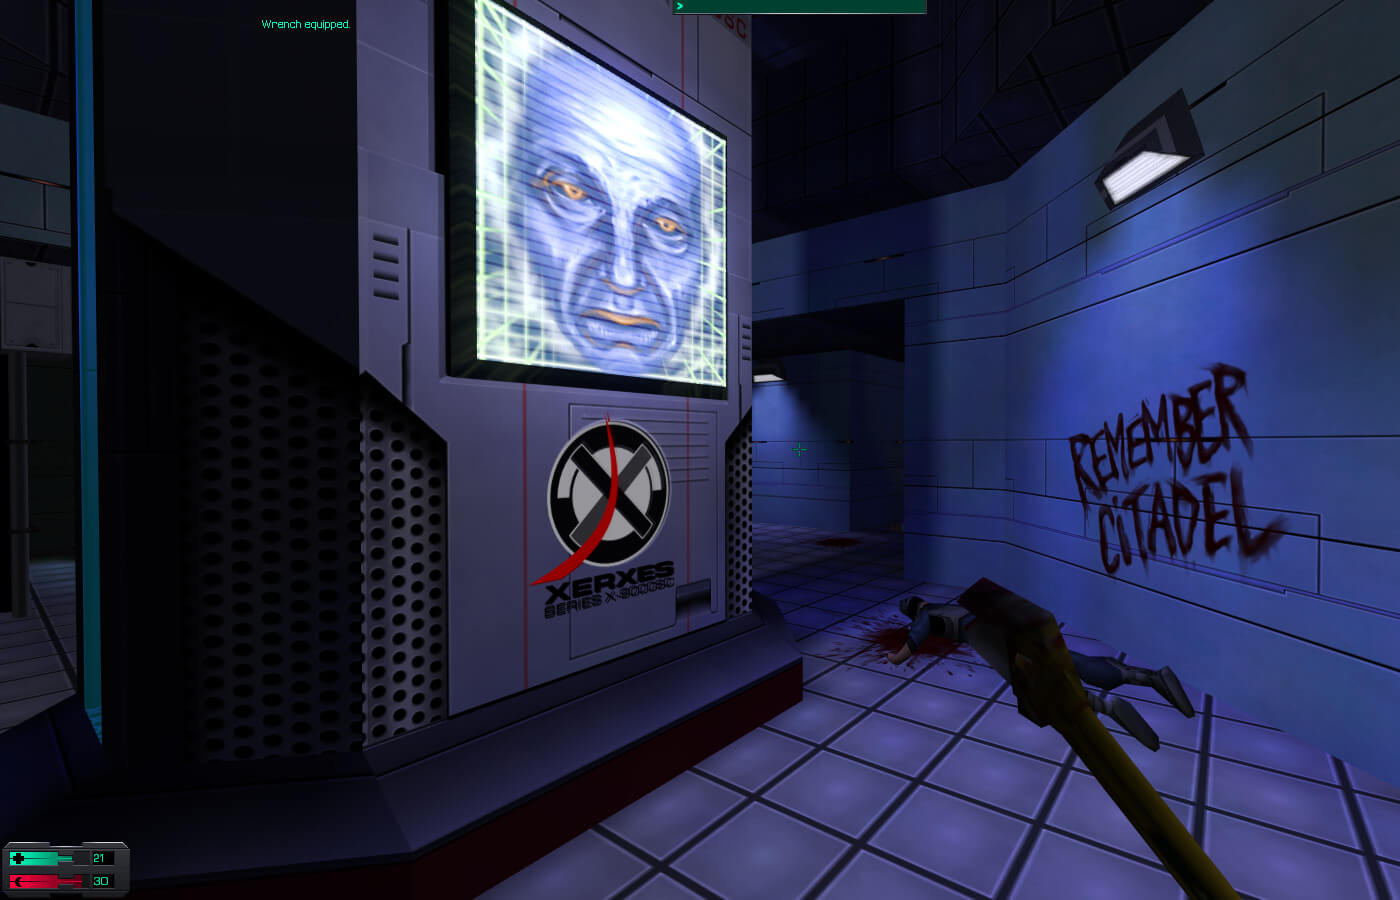 The System Shock 2020